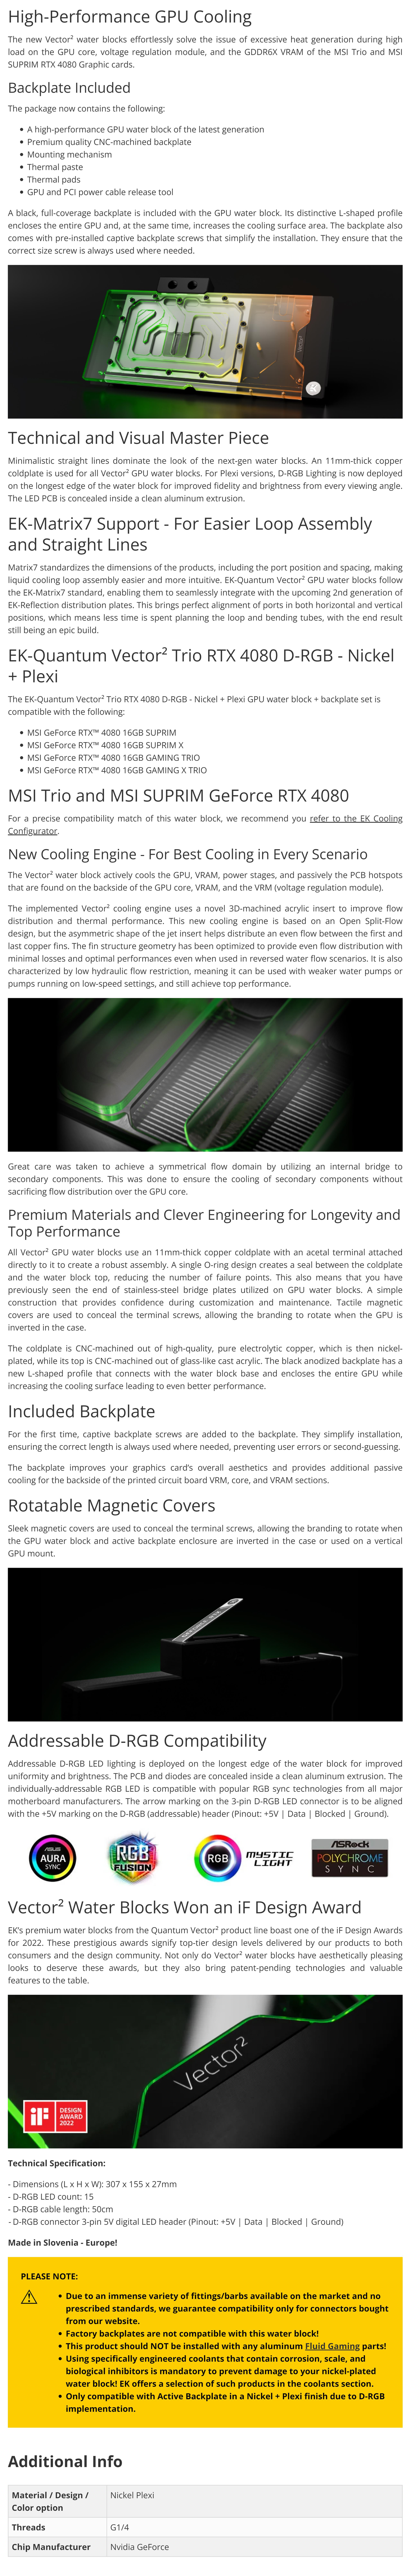 A large marketing image providing additional information about the product EK Quantum Vector2 Trio RTX 4080 D-RGB GPU Waterblock - Nickel + Plexi - Additional alt info not provided